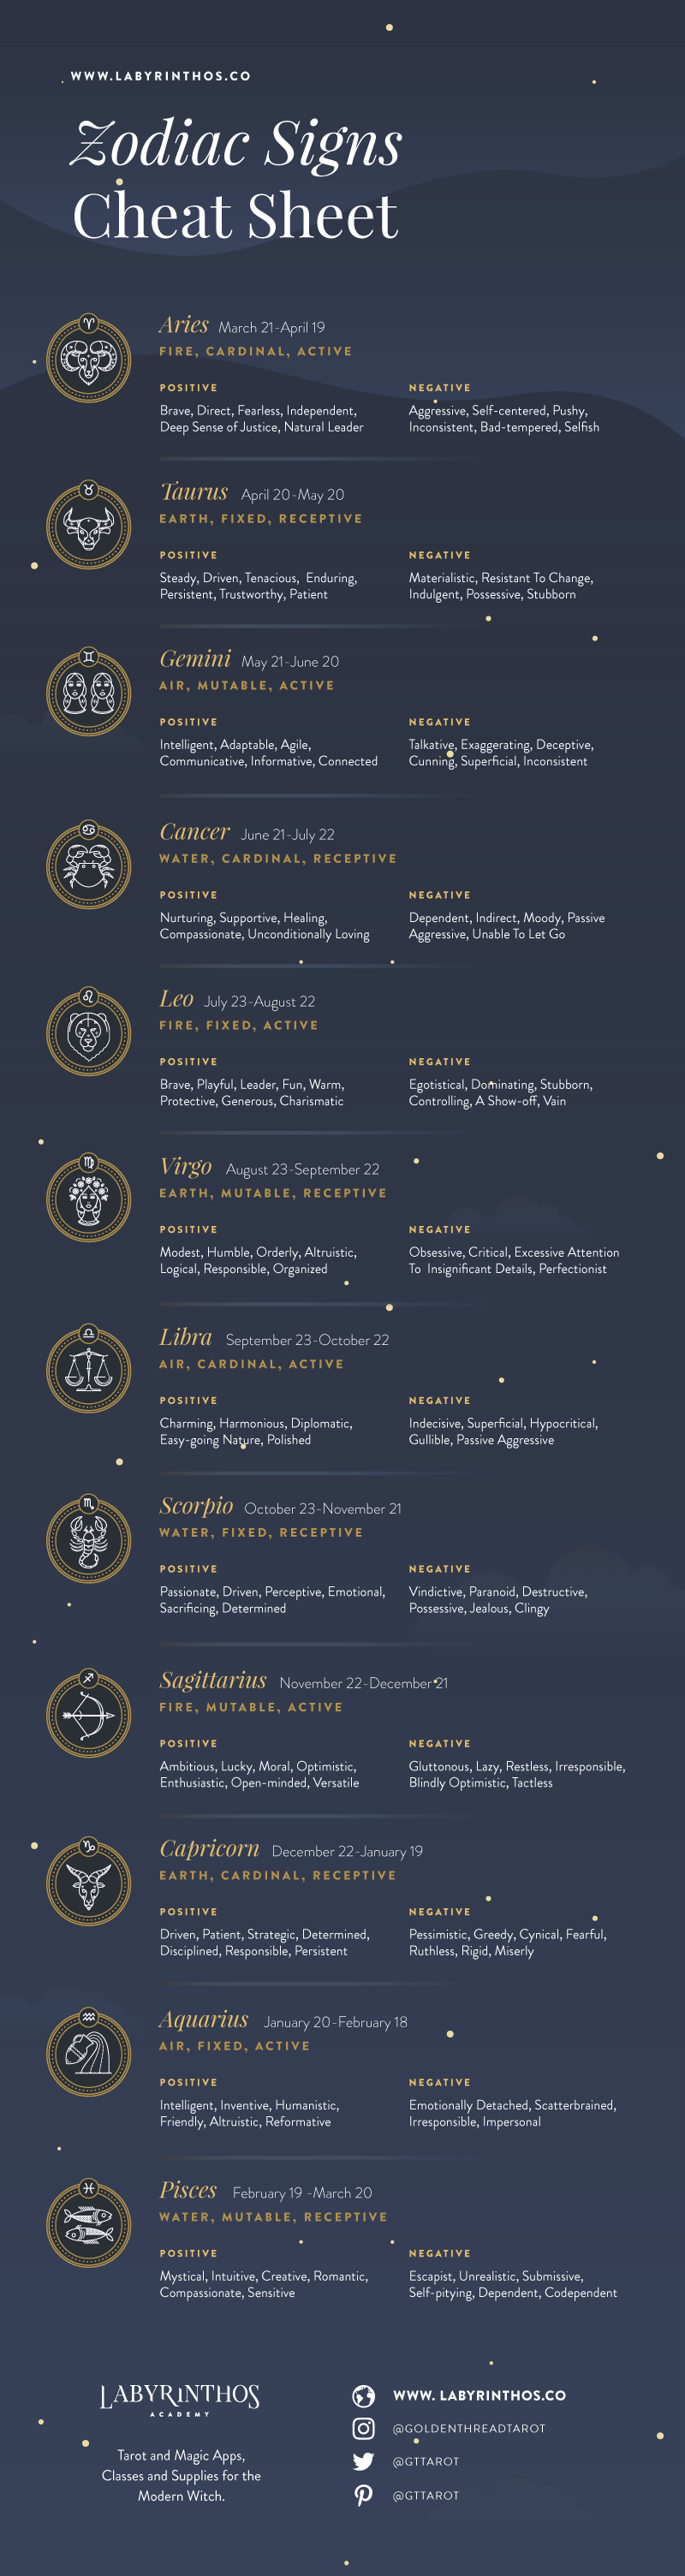 Infographic - List of 12 Zodiac Signs - Dates, Strengths, Weaknesses